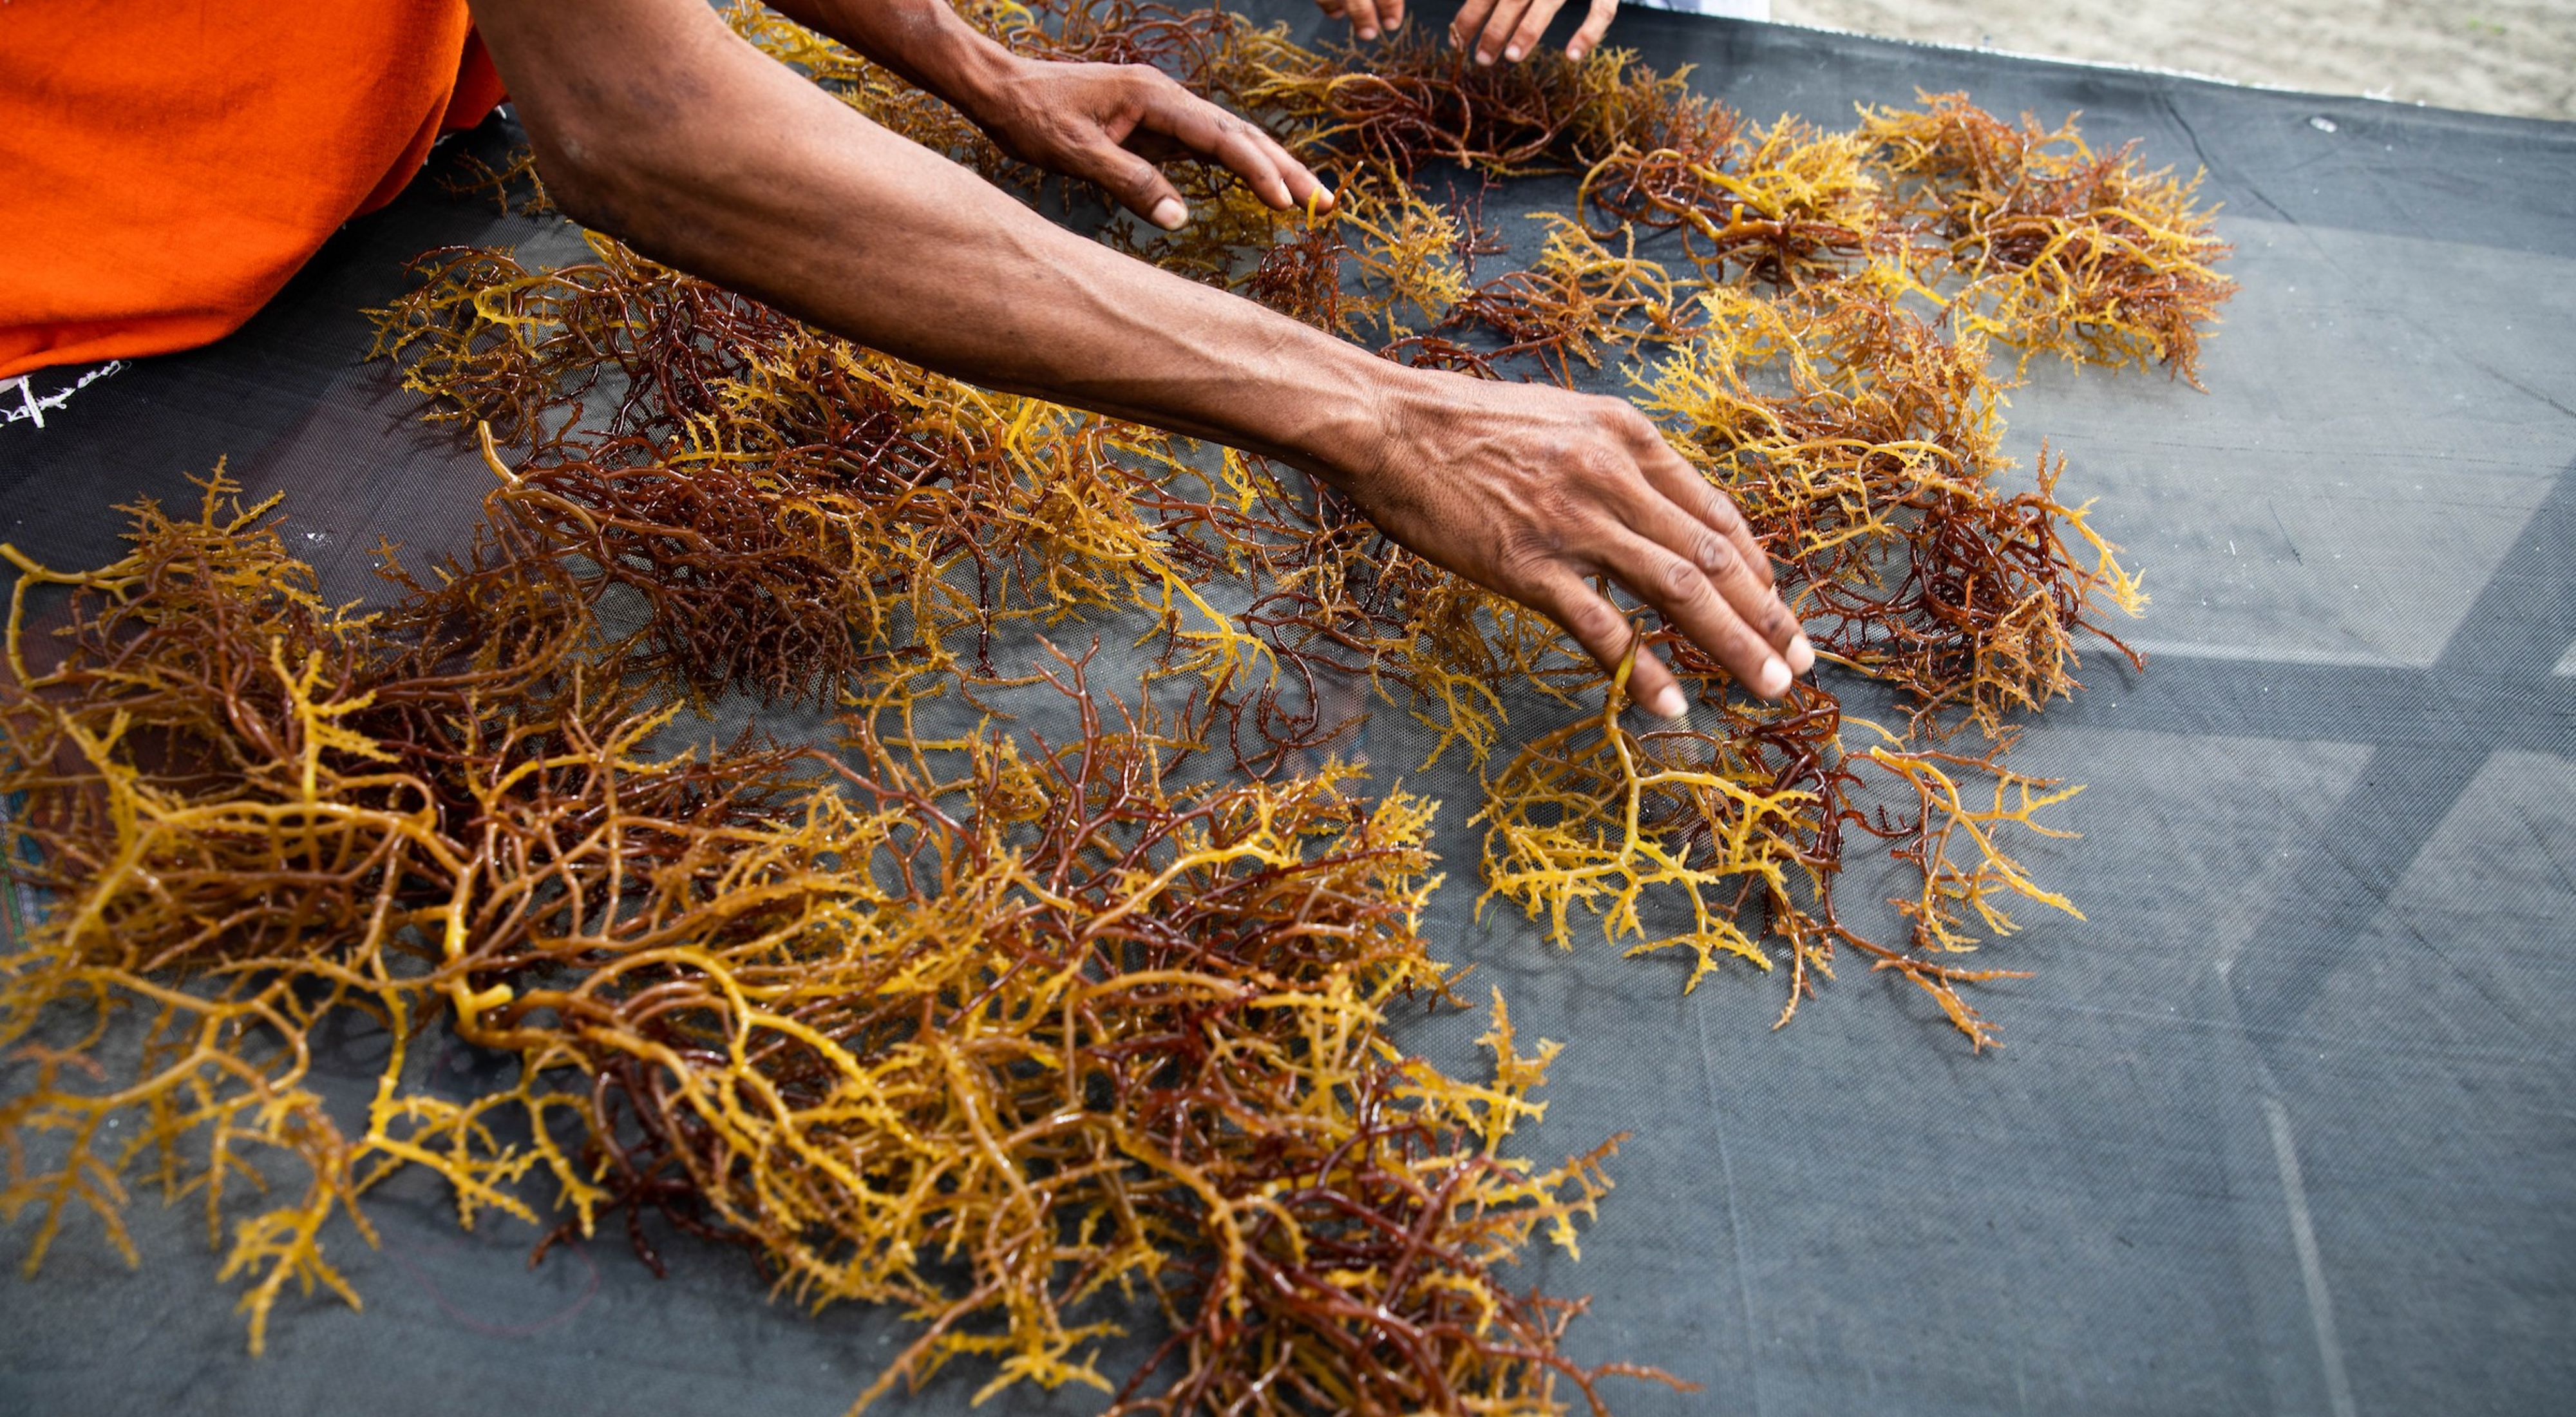 Two people's hands sort through harvested seaweed sitting on a black tarp.